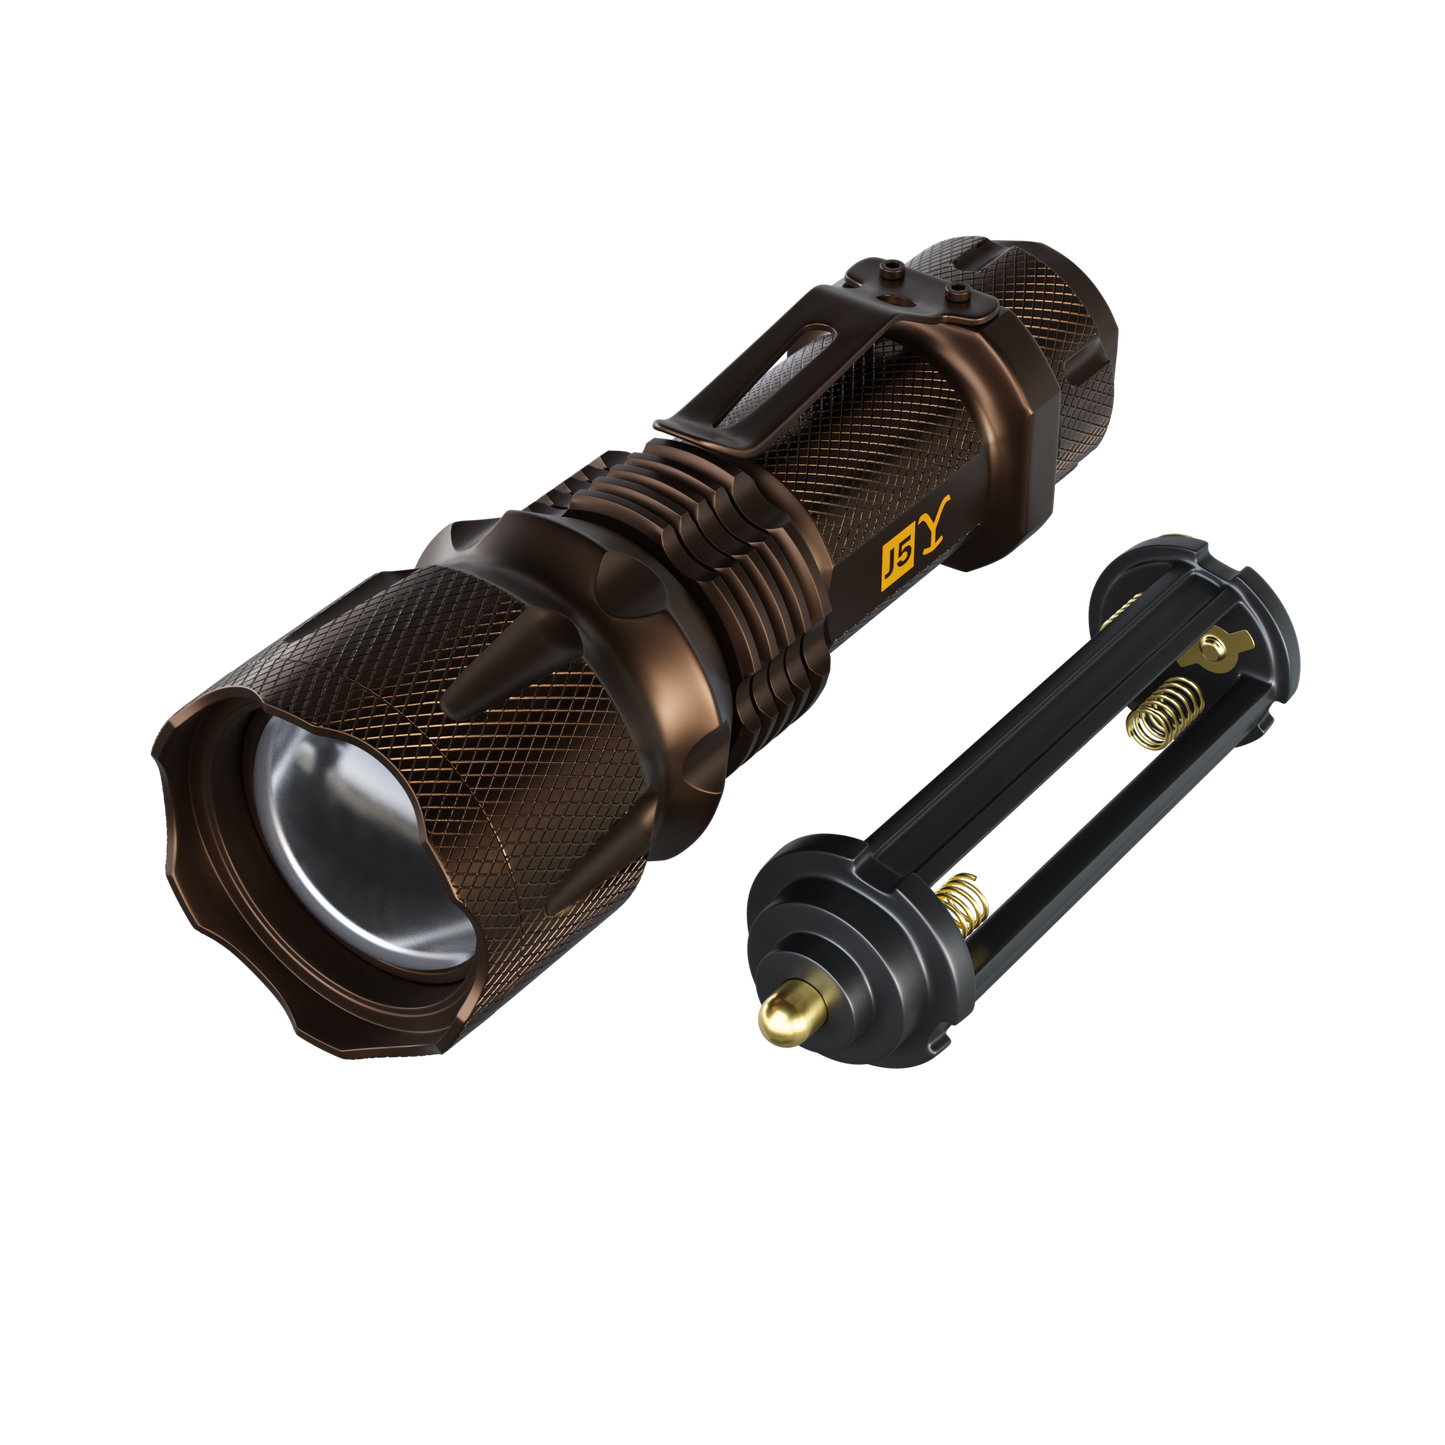 Yellowstone Edition J5 Tactical Hyper V Taschenlampe